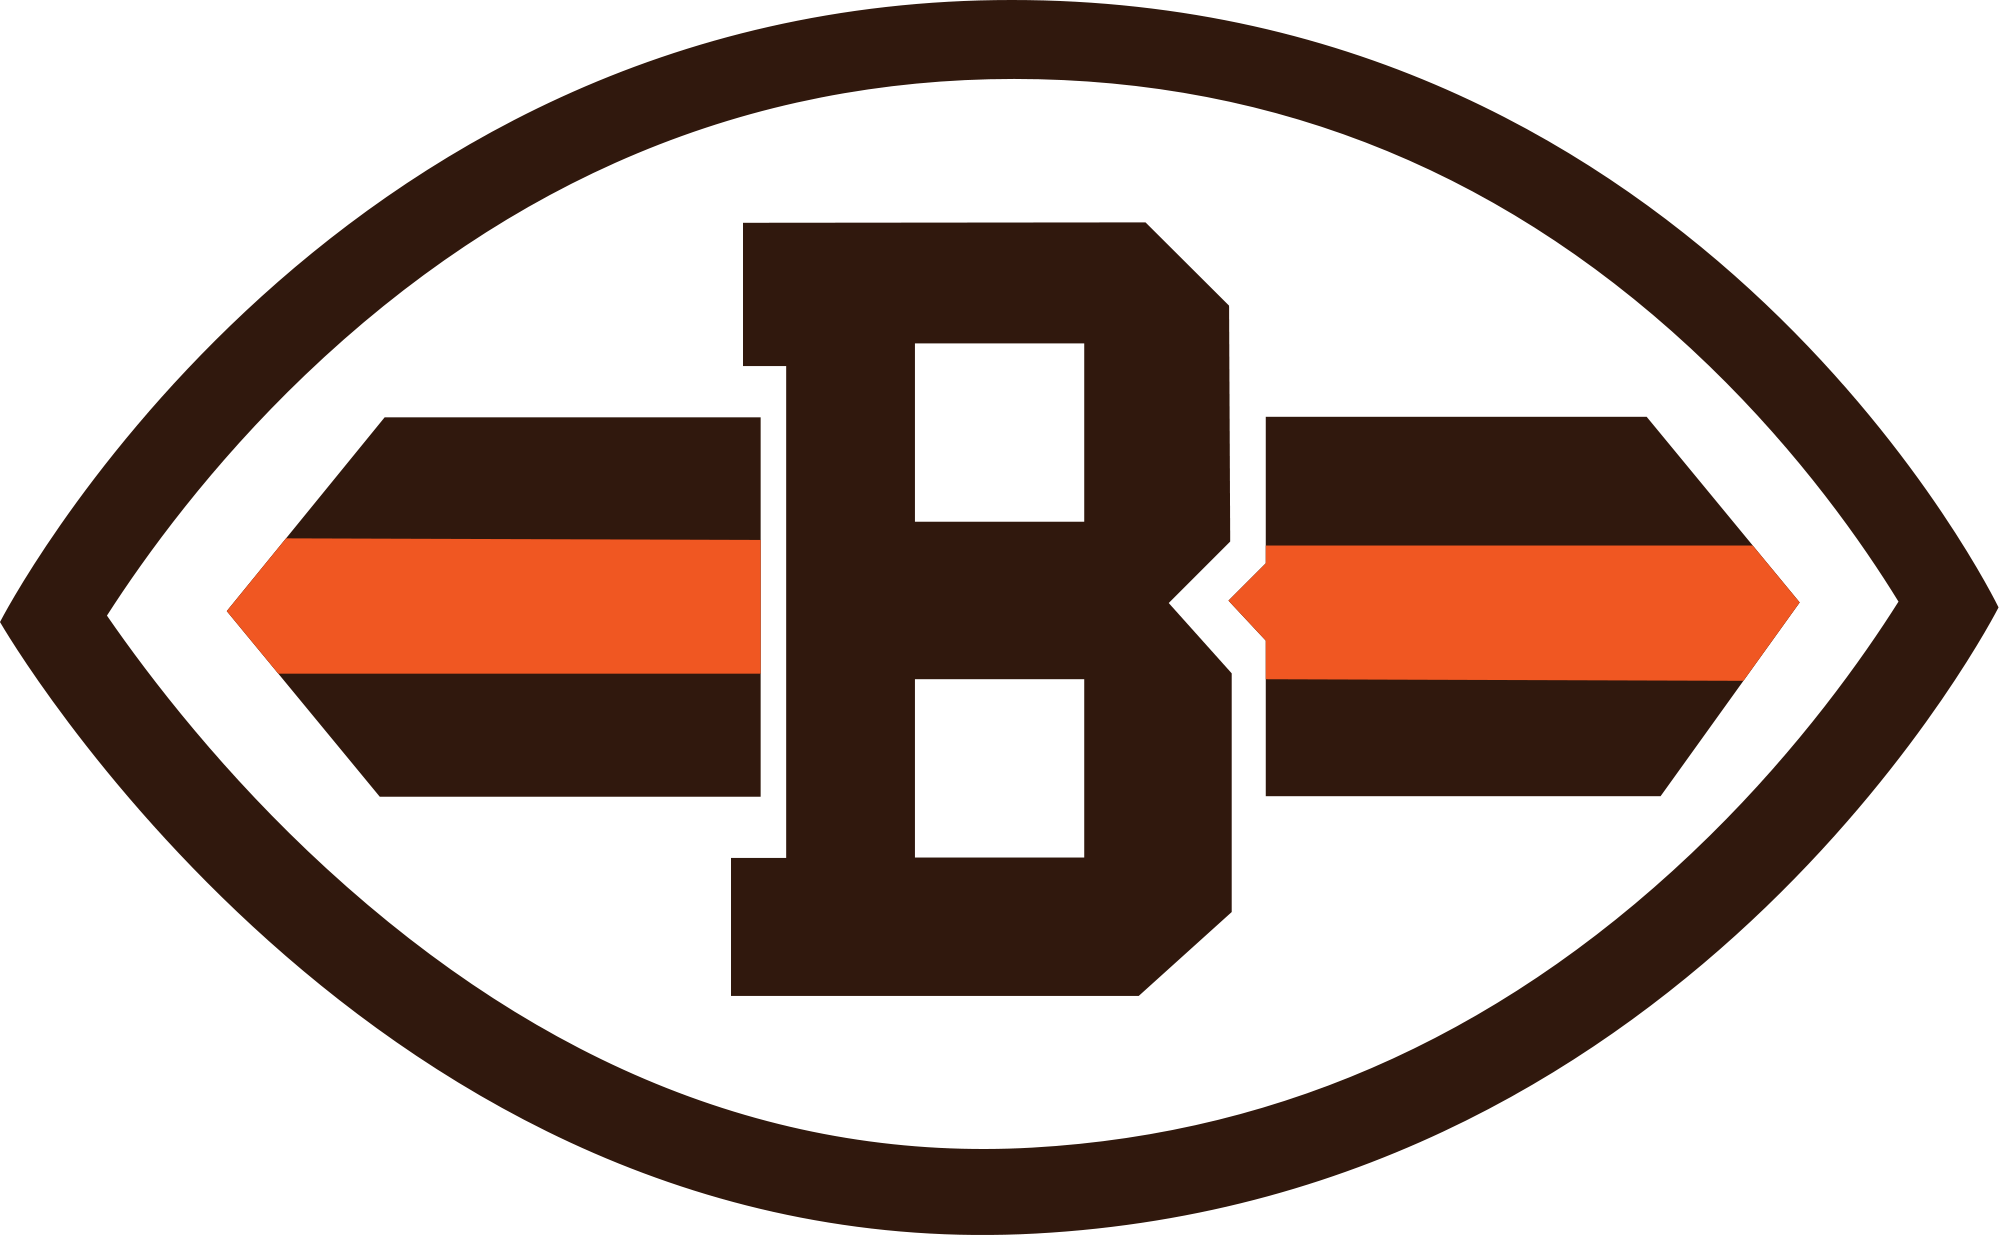 Cleveland Browns PNG Picture